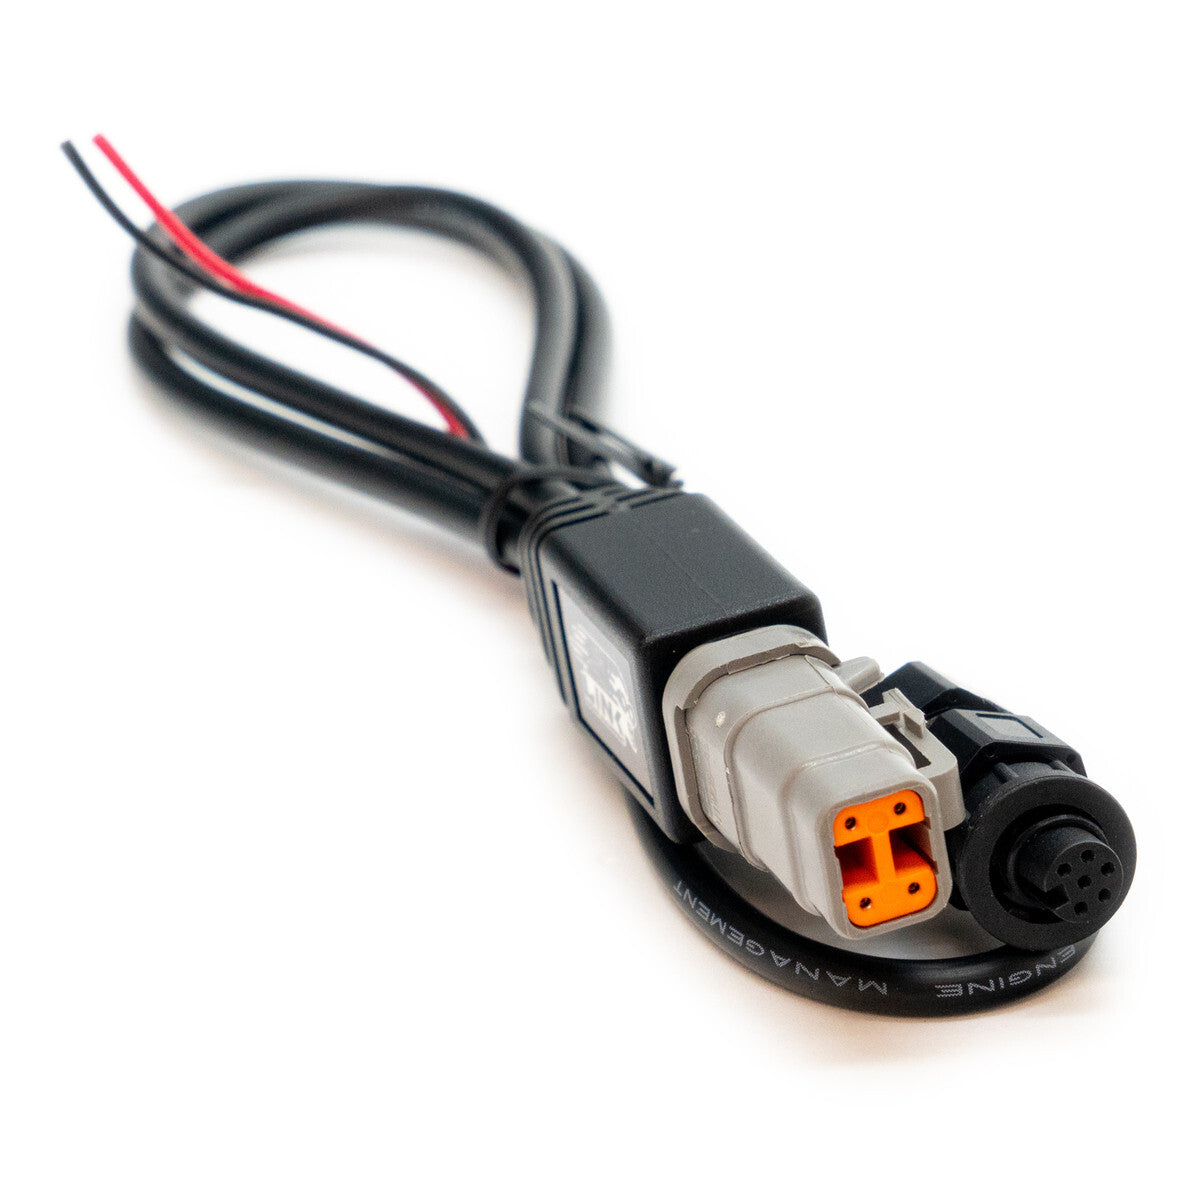 Link CAN Cable for G4X/G4+ WireIn ECU's (CANLTW)